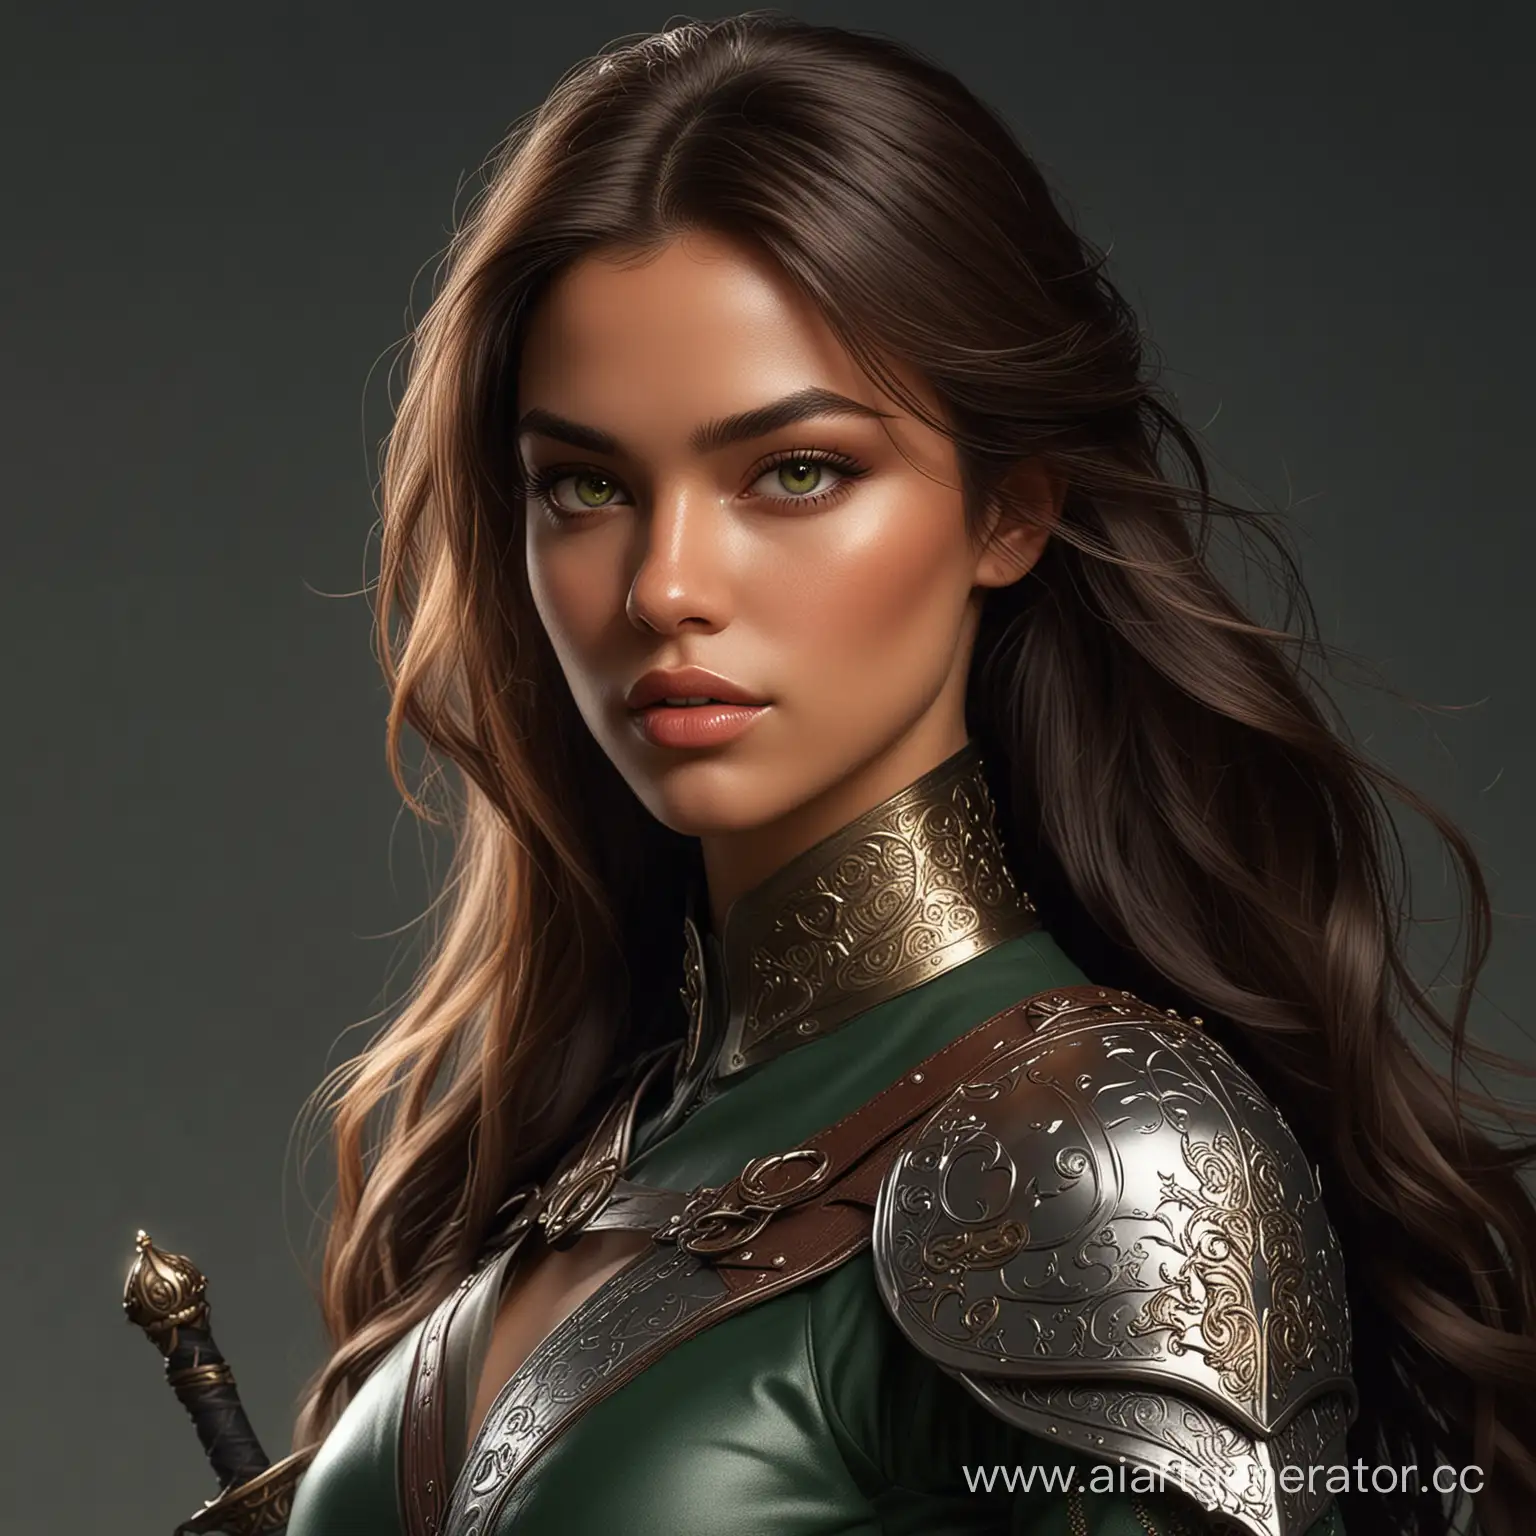 Powerful-Woman-Warrior-with-Glossy-Detailed-Features-and-Minimalist-Sword-in-Adventurers-Attire